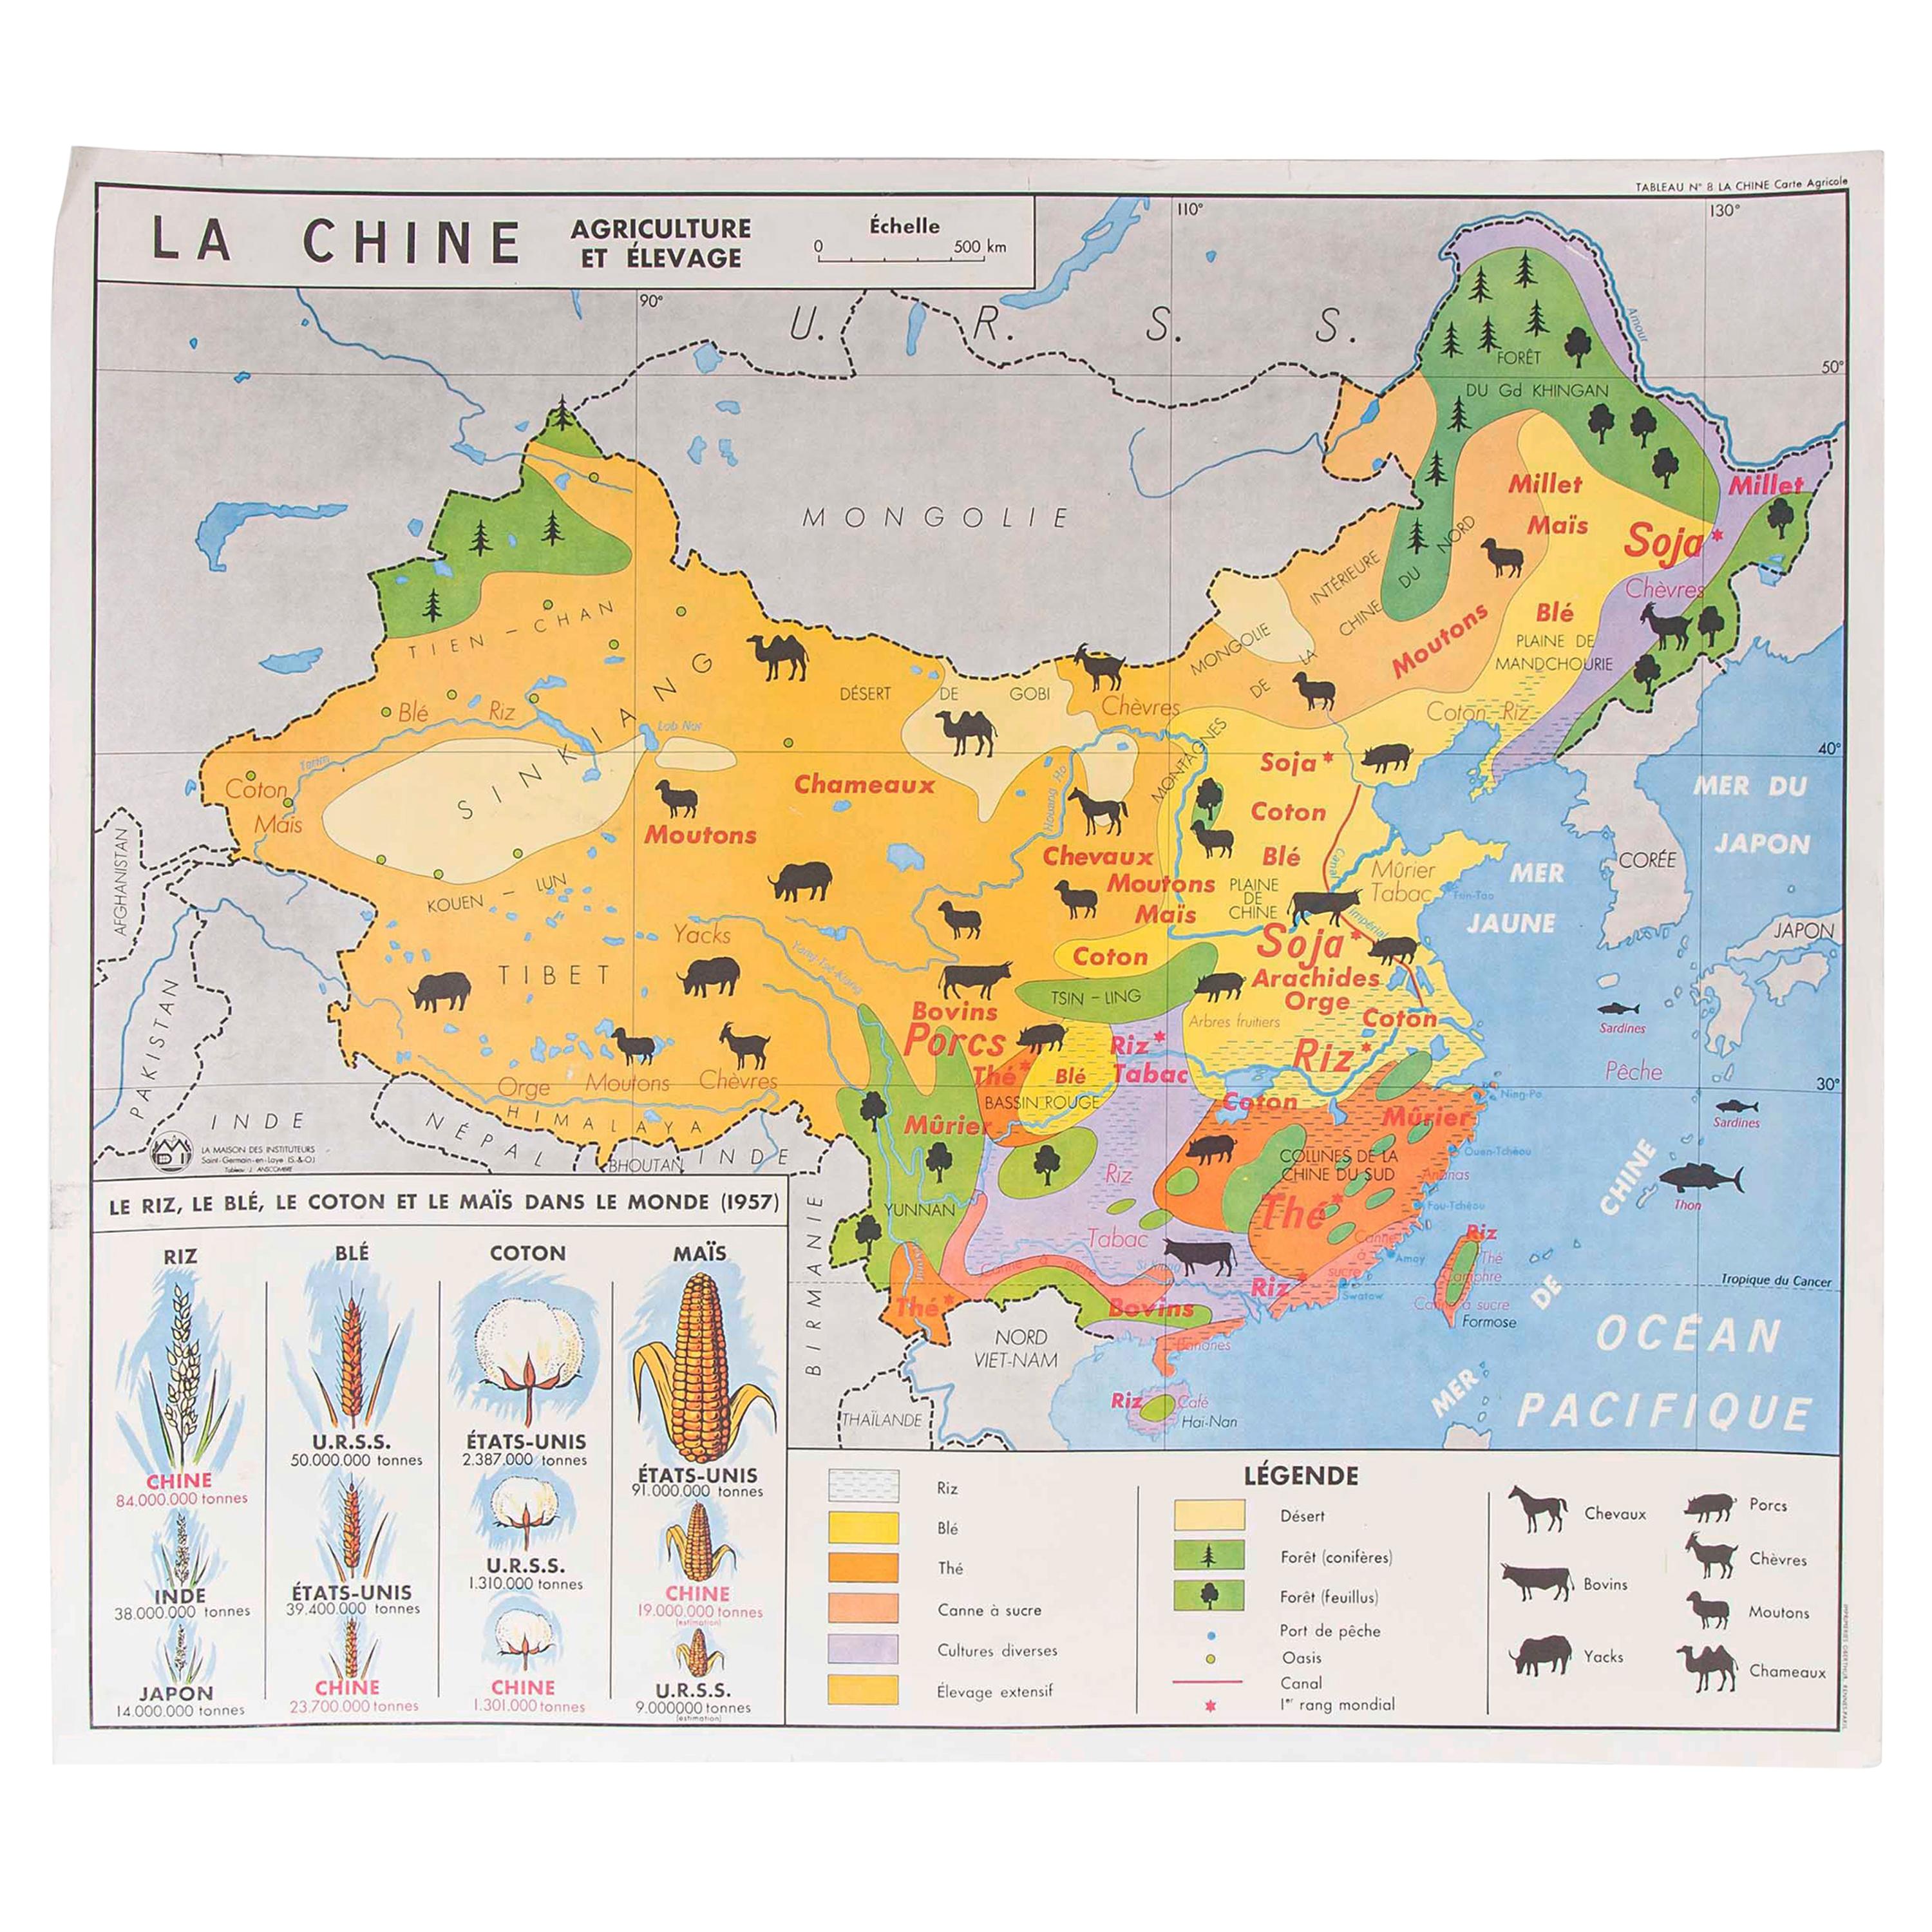 French Double Sided Educational School Poster of the Agriculture of China and US